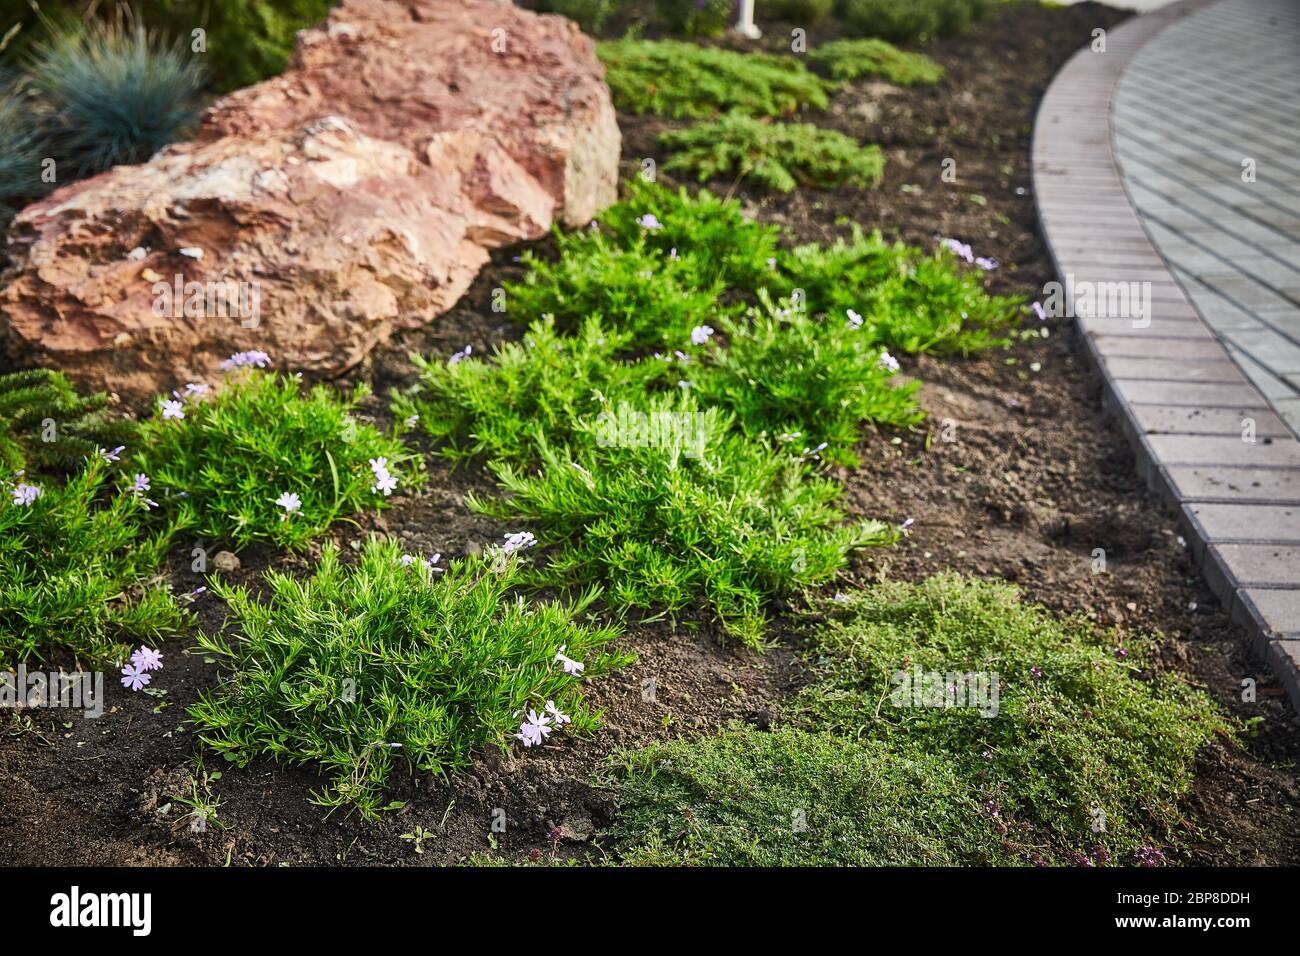 Several bushes of Coleonema blooming with white flowers in the soil on a summer day in landscape design. Stock Photo